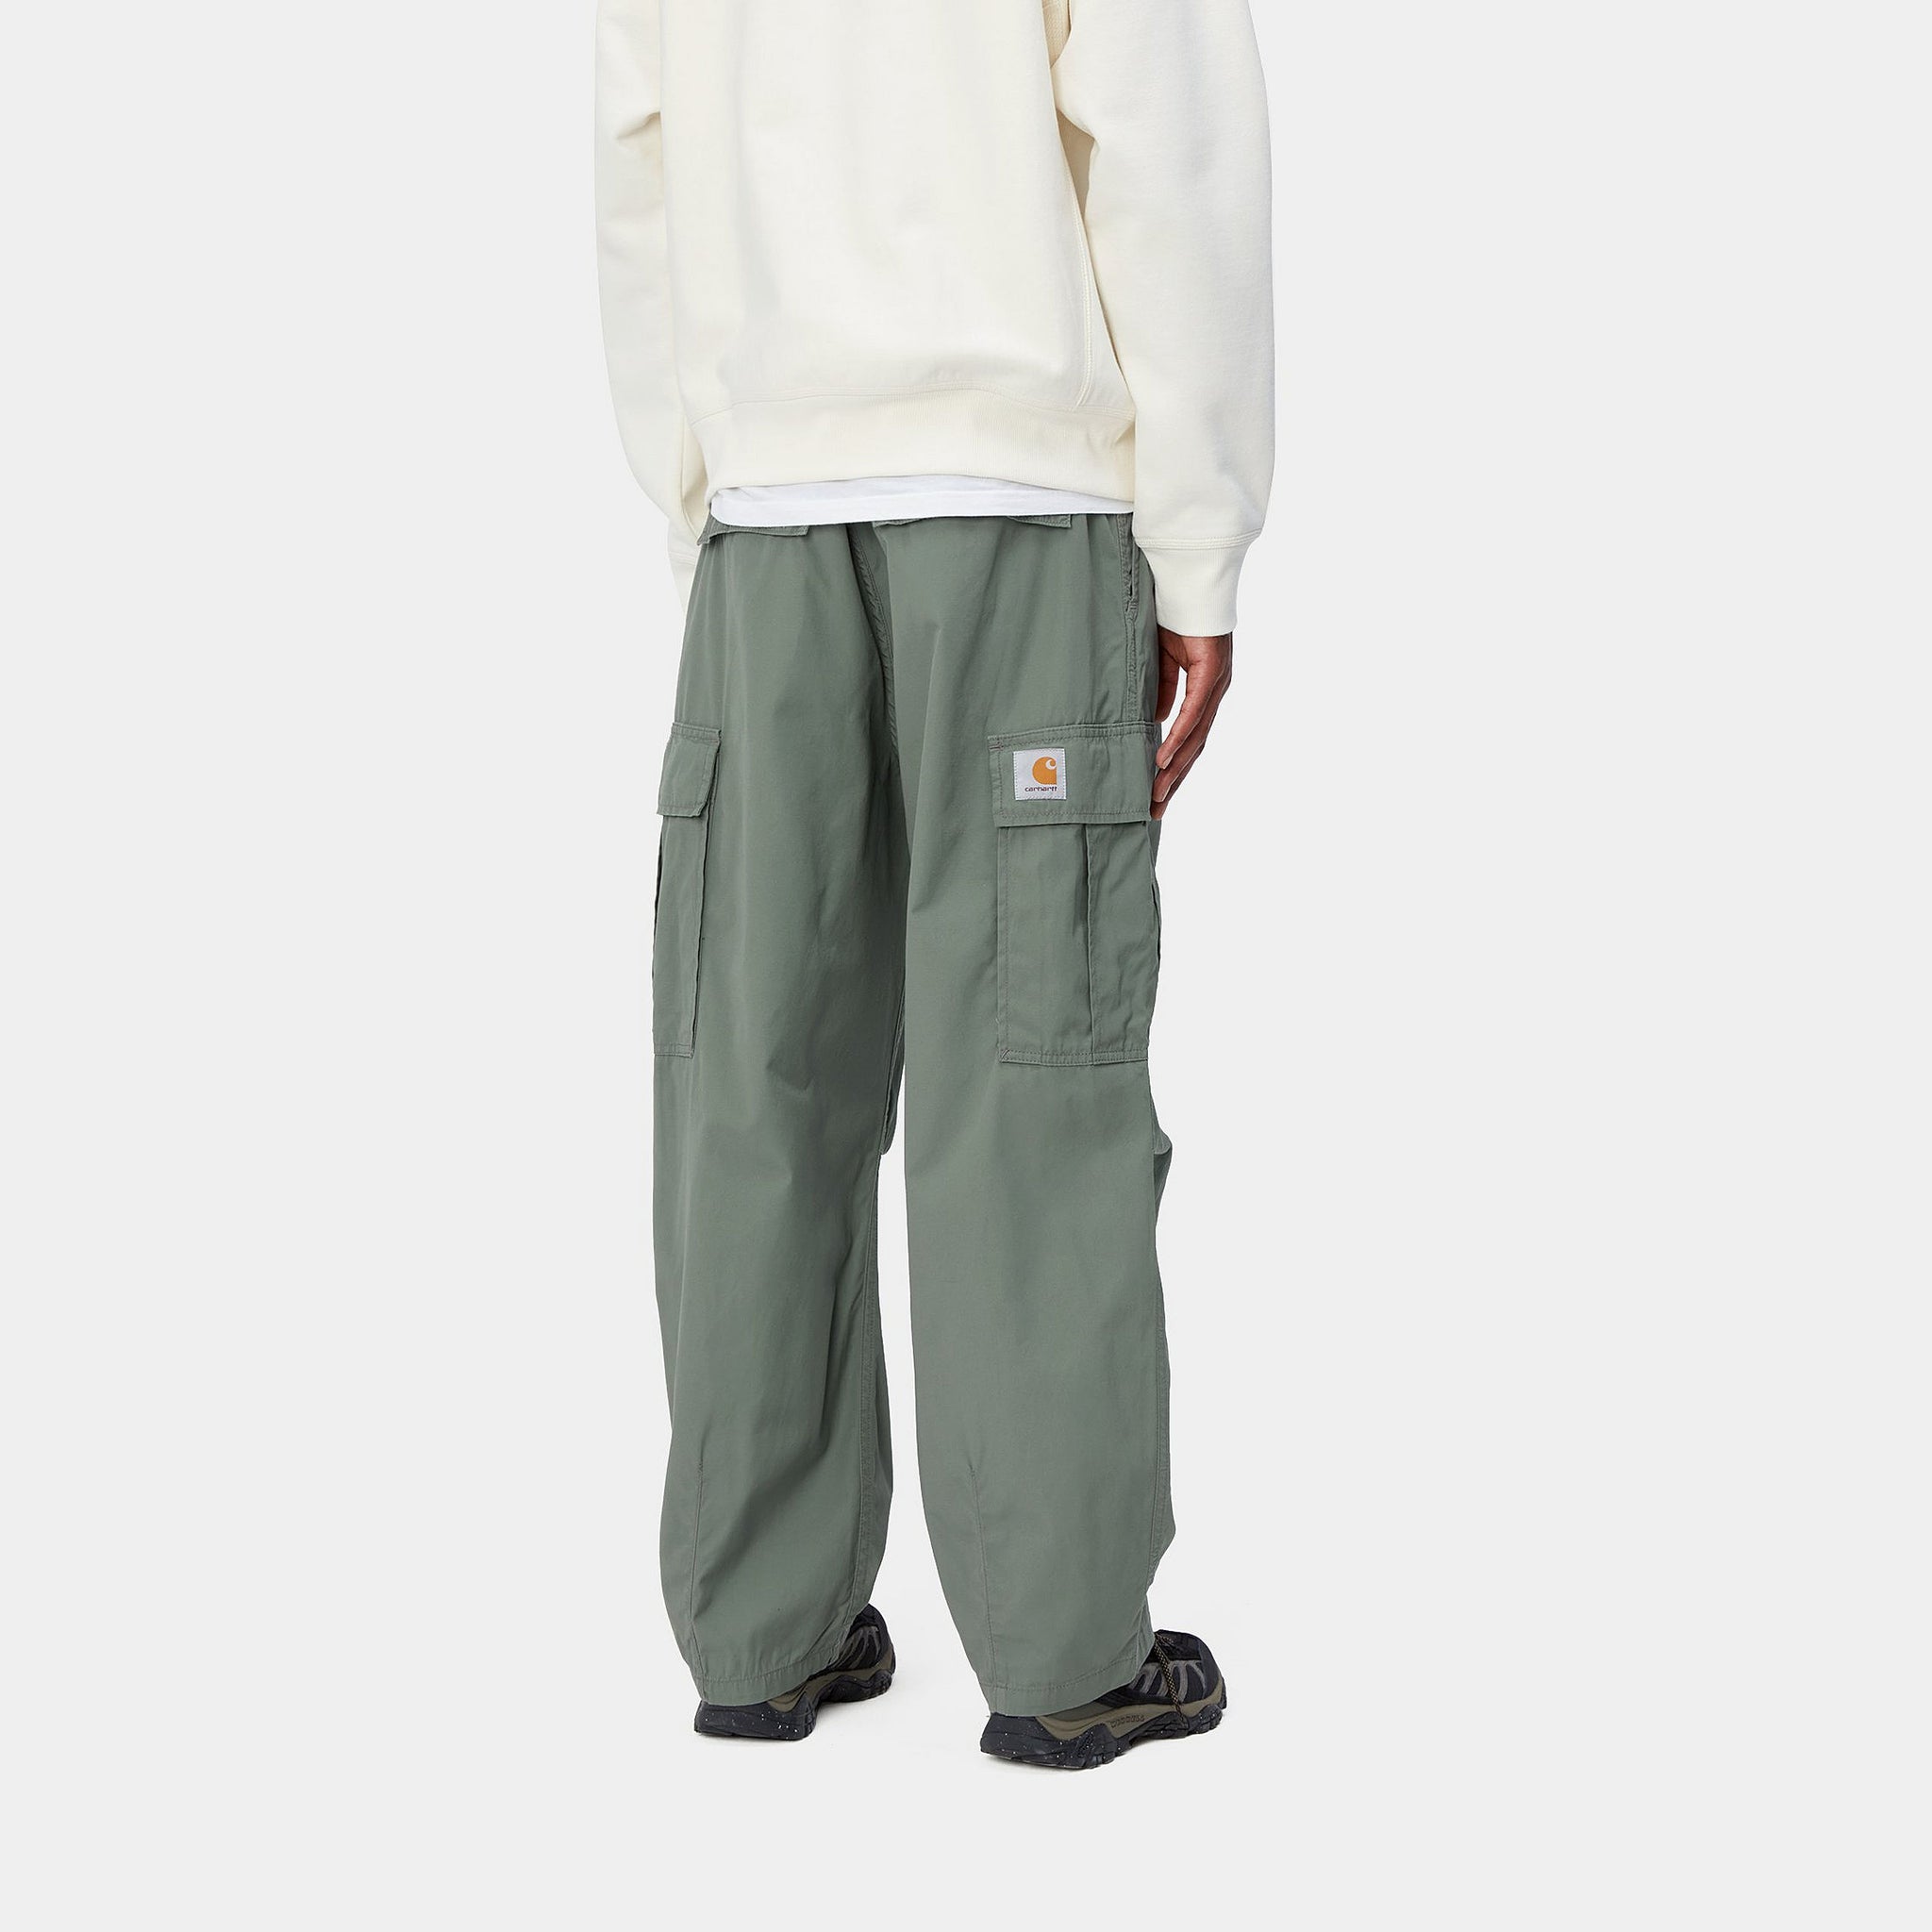 Carhartt WIP Cole Cargo Pant (Park rinsed no length)